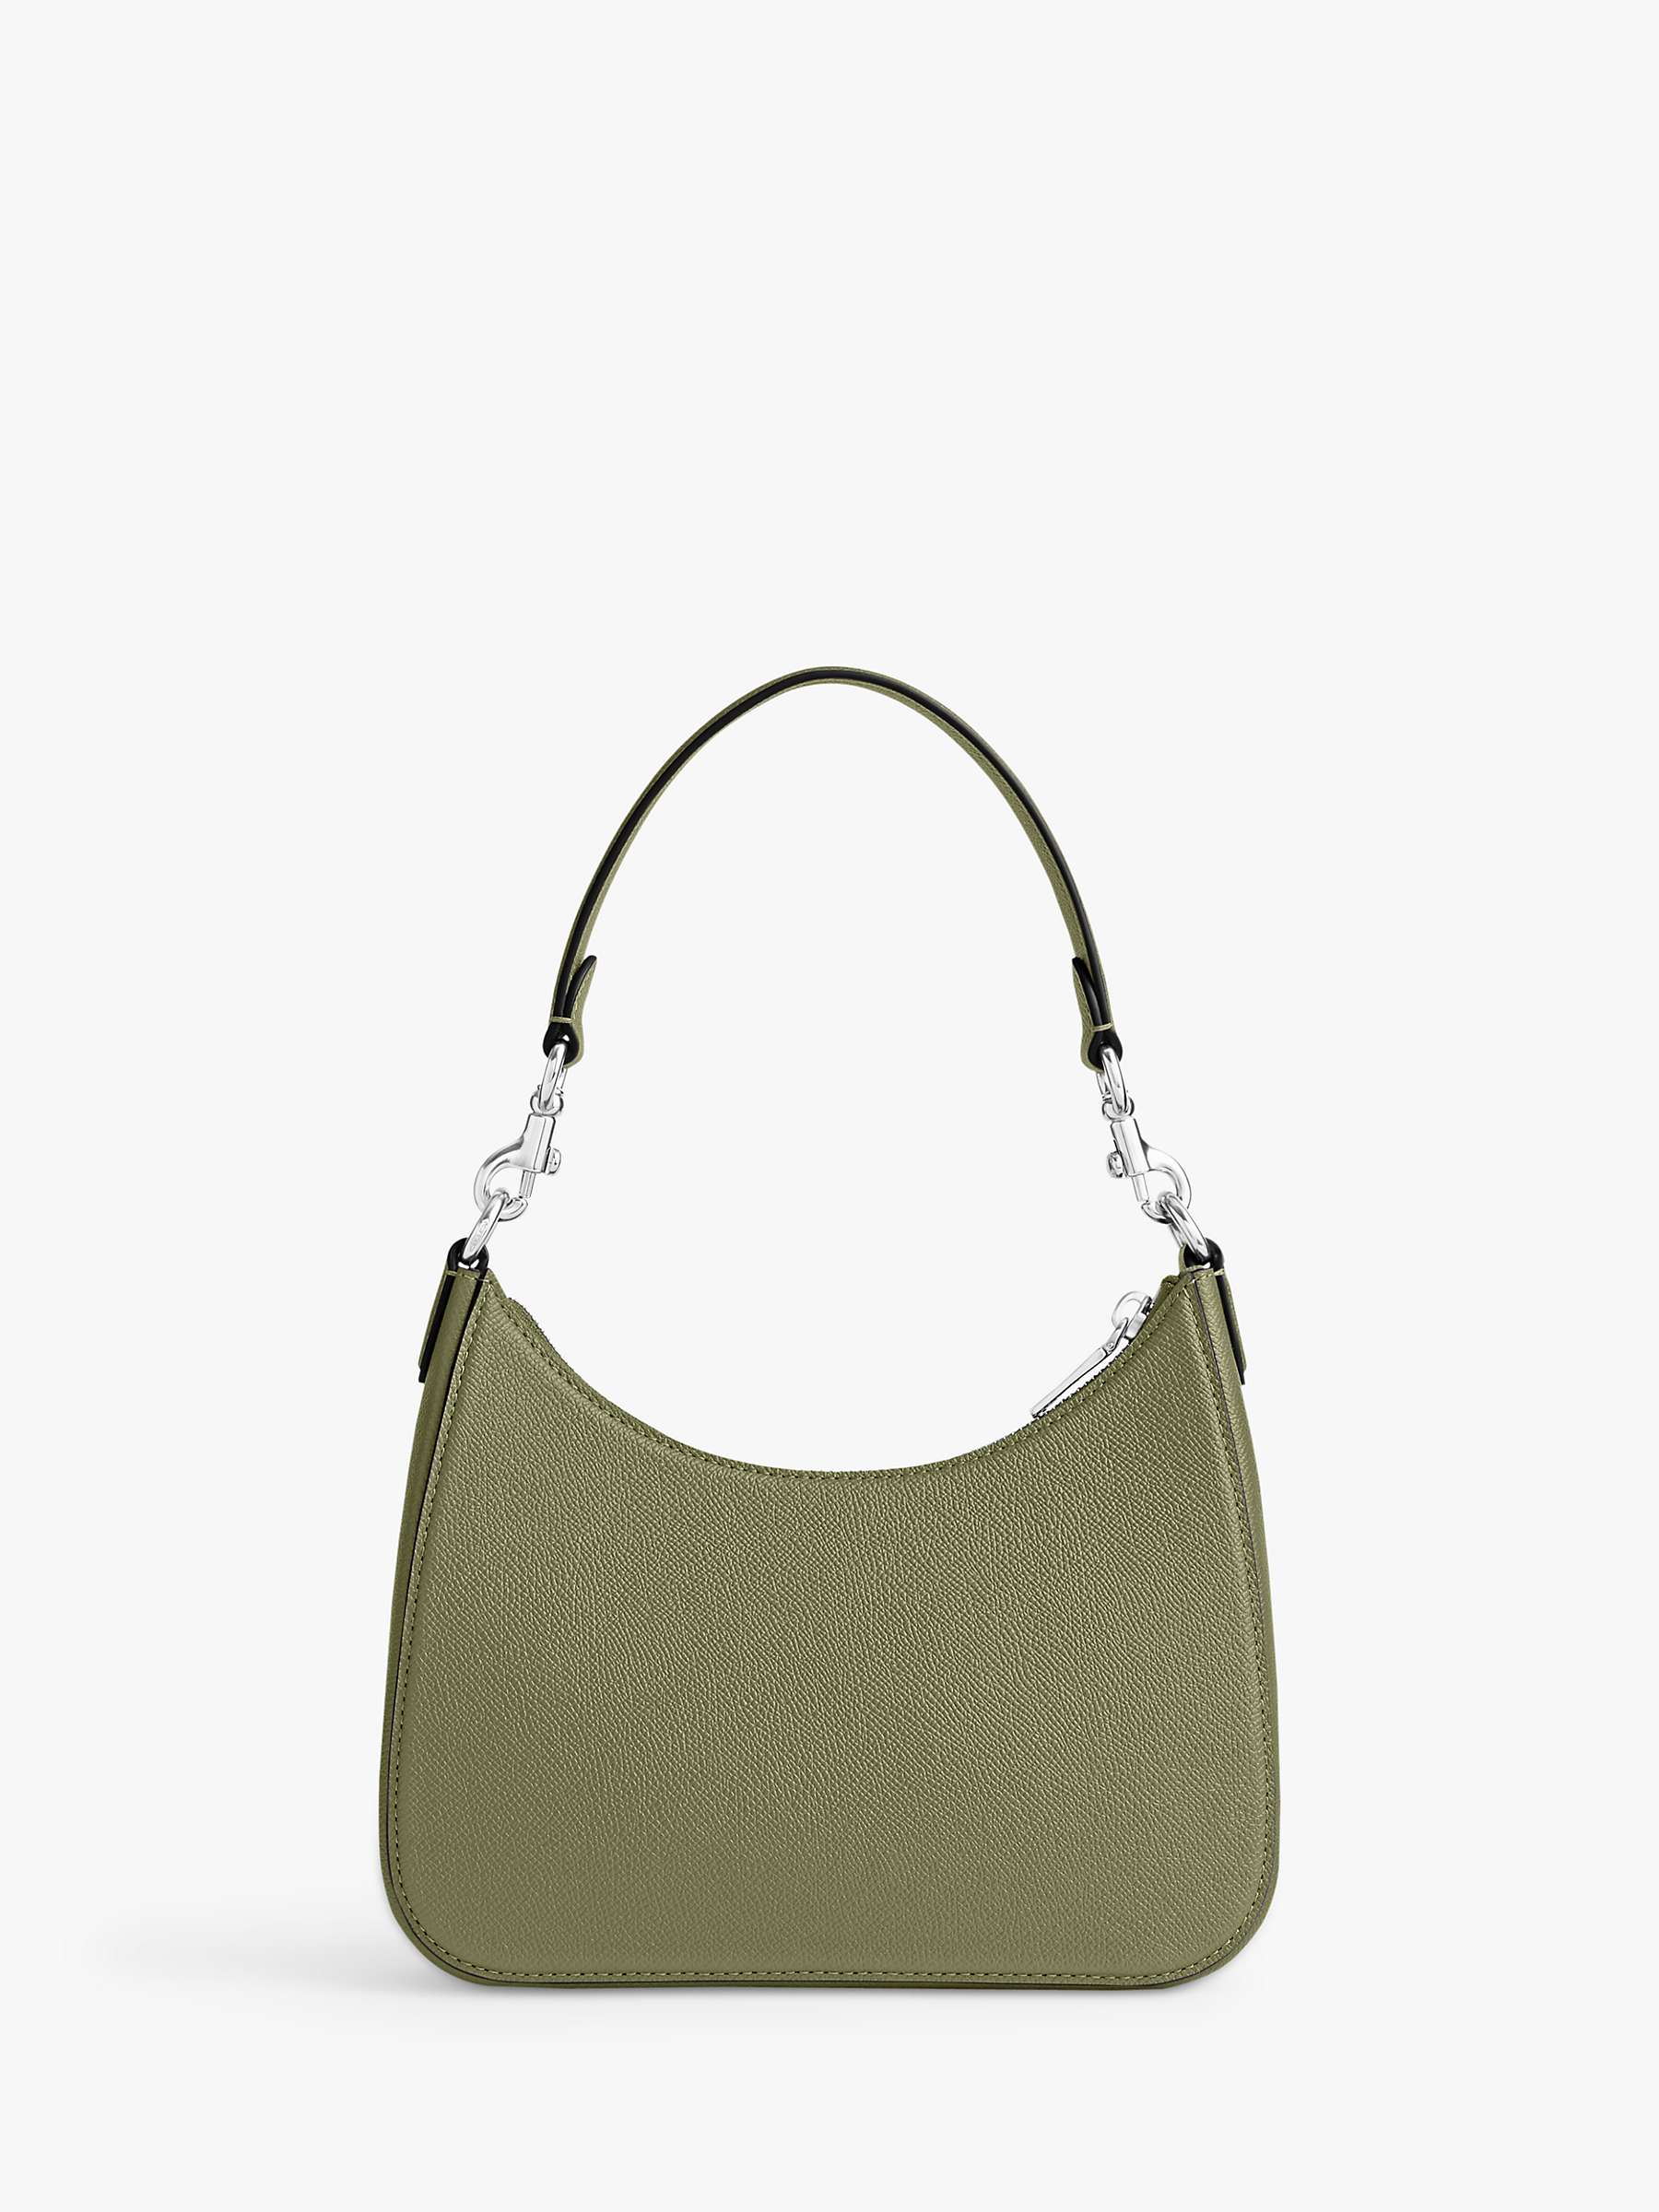 Buy Coach Leather Hobo Cross Body Bag, Moss Online at johnlewis.com